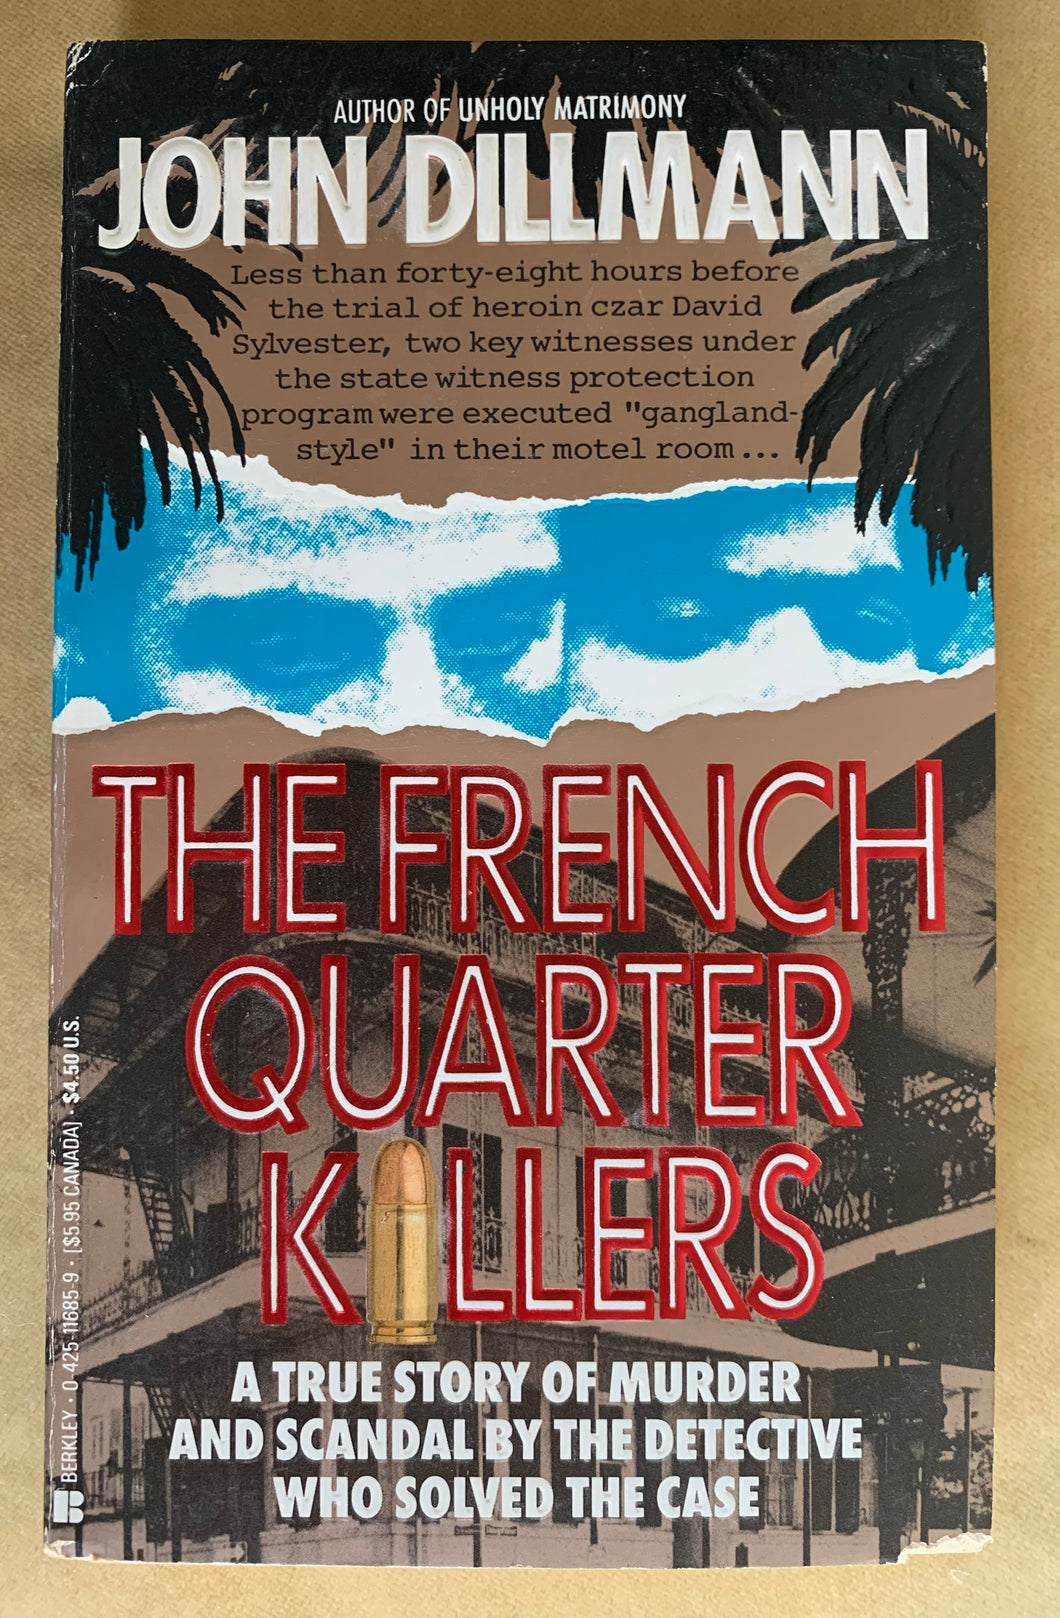 The French Quarter Killers: A True Story of Murder and Scandal by the Detective Who Solved the Case